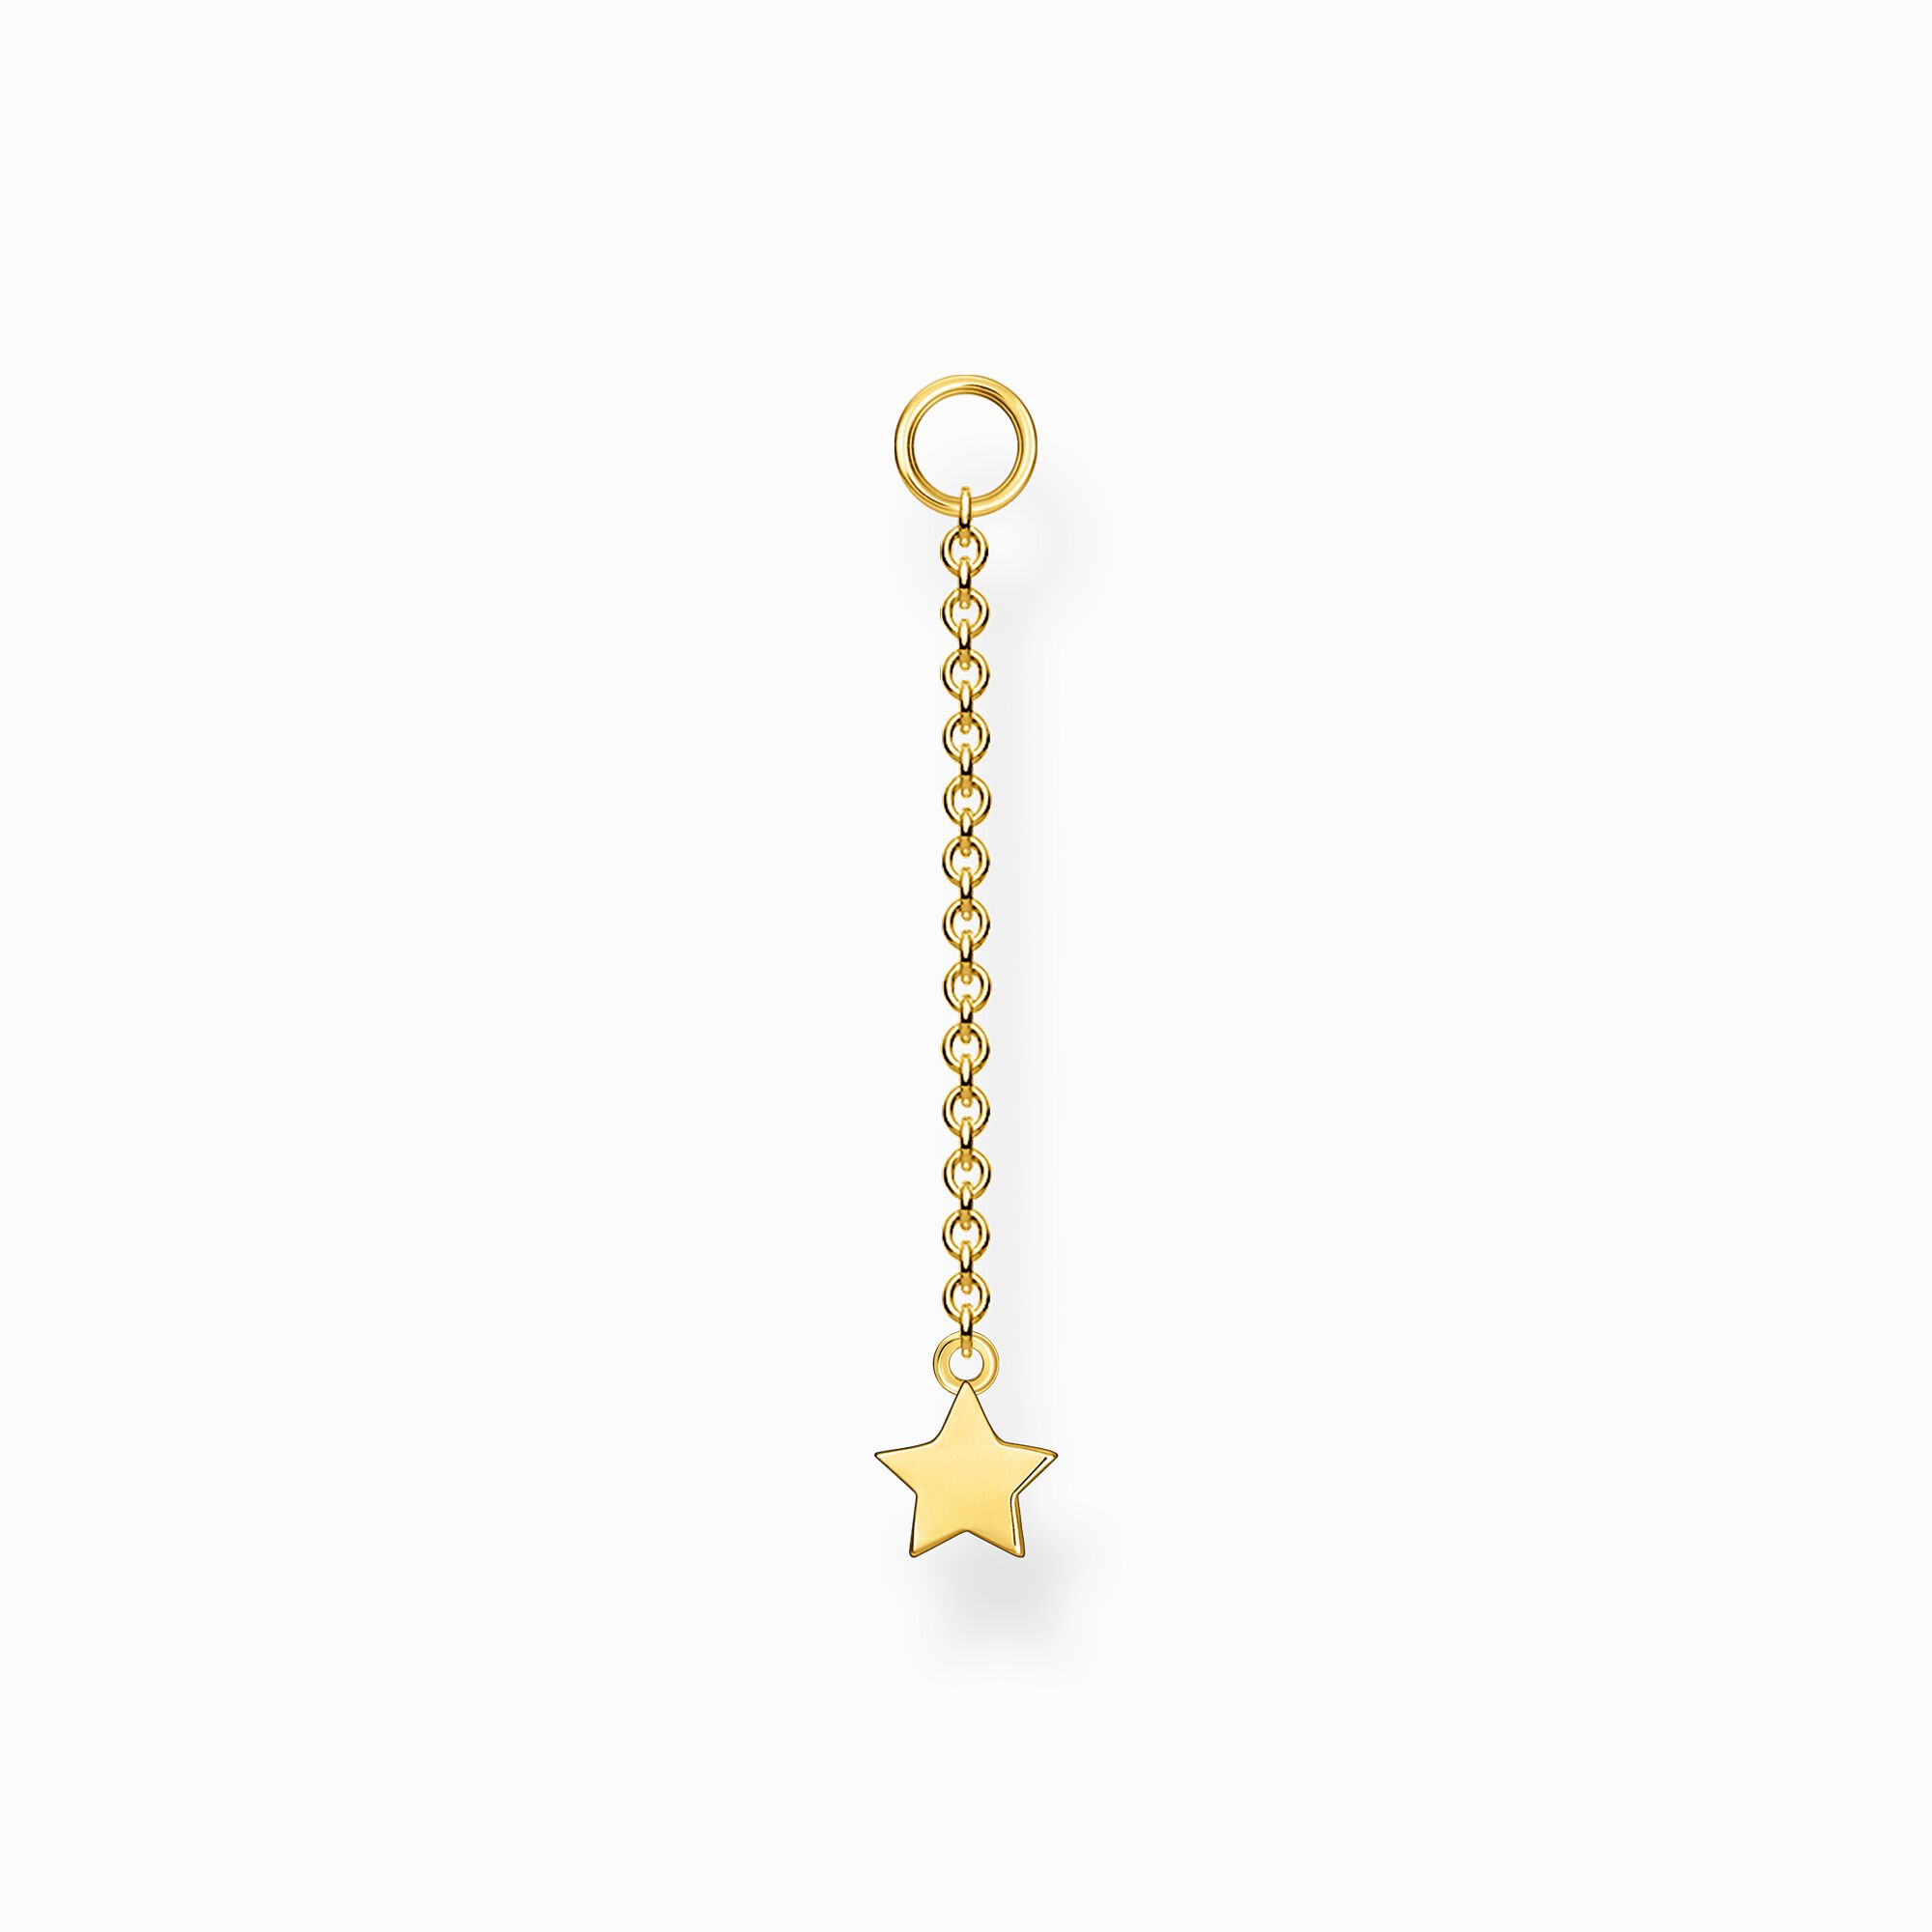 THOMAS chain with SABO pendant earring – Golden